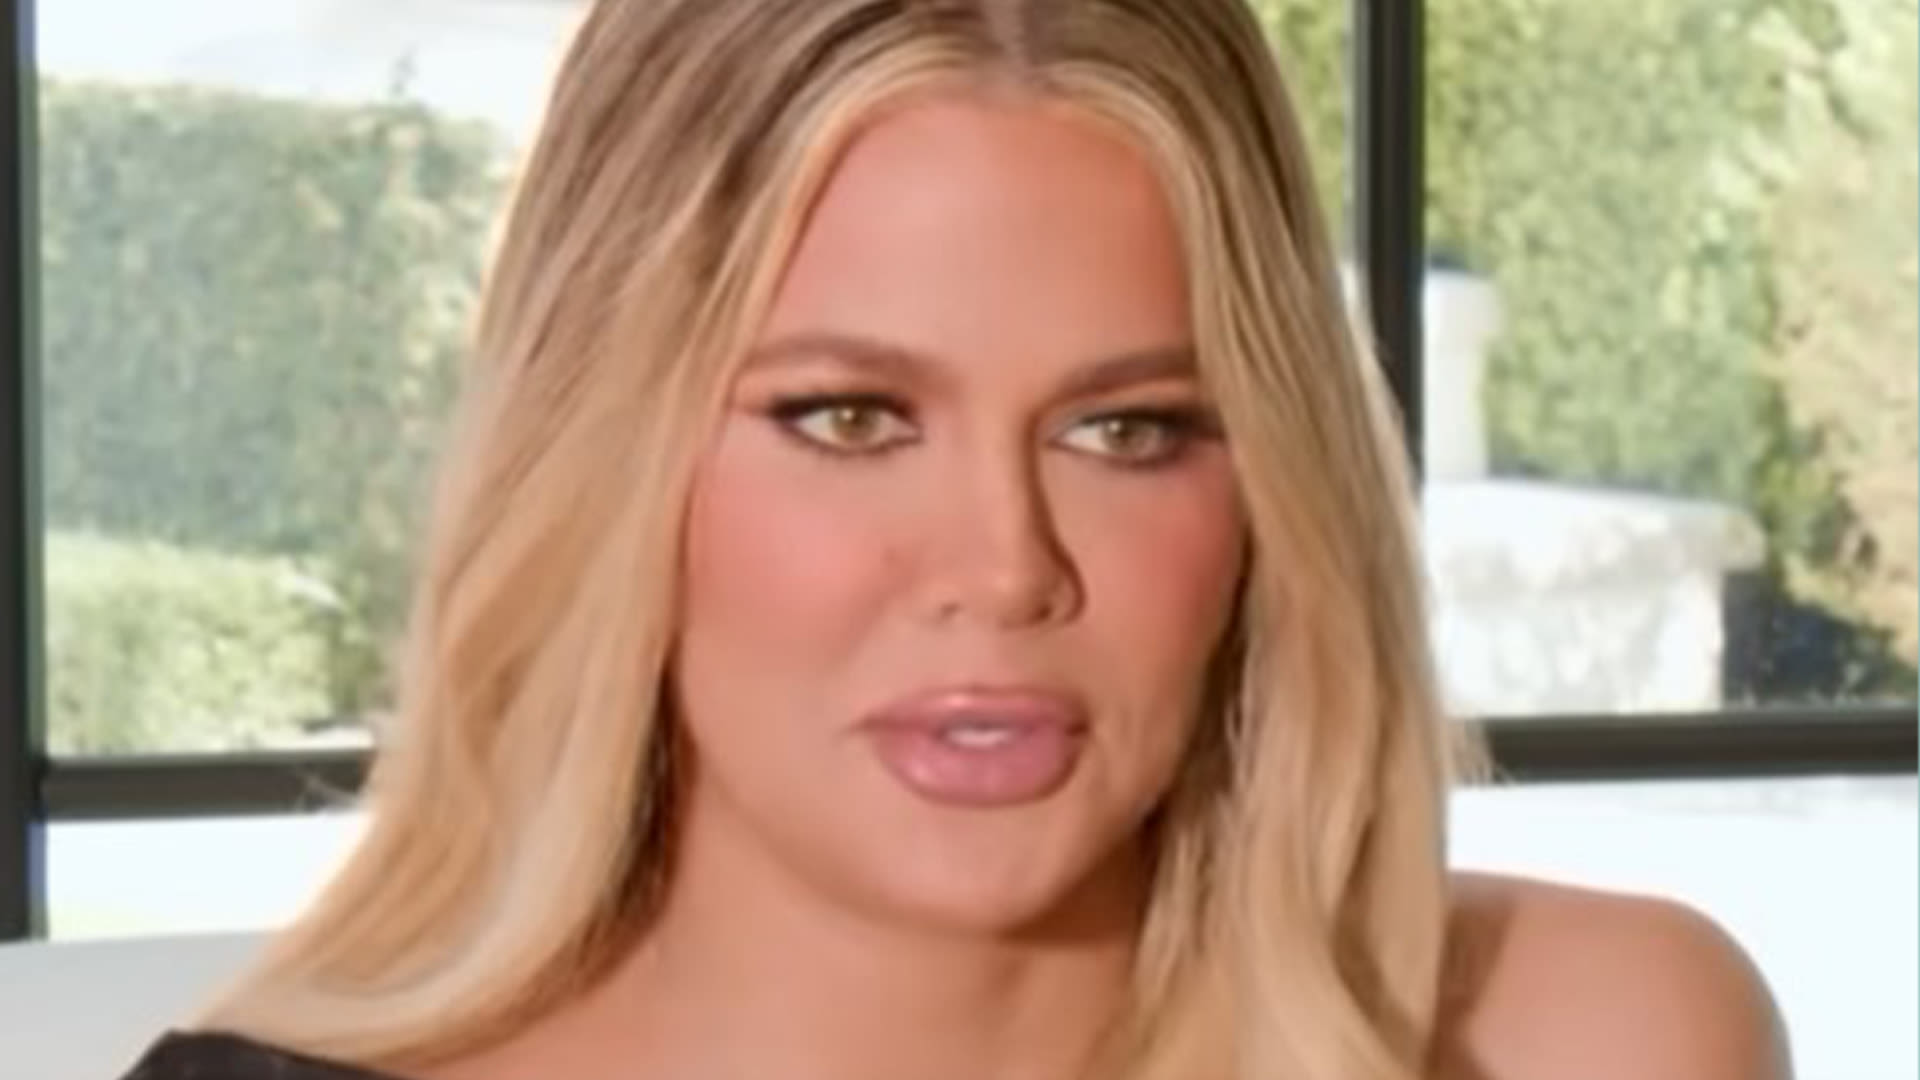 Khloe reveals 'extreme' diet when 'overweight' and would 'cry' after eating